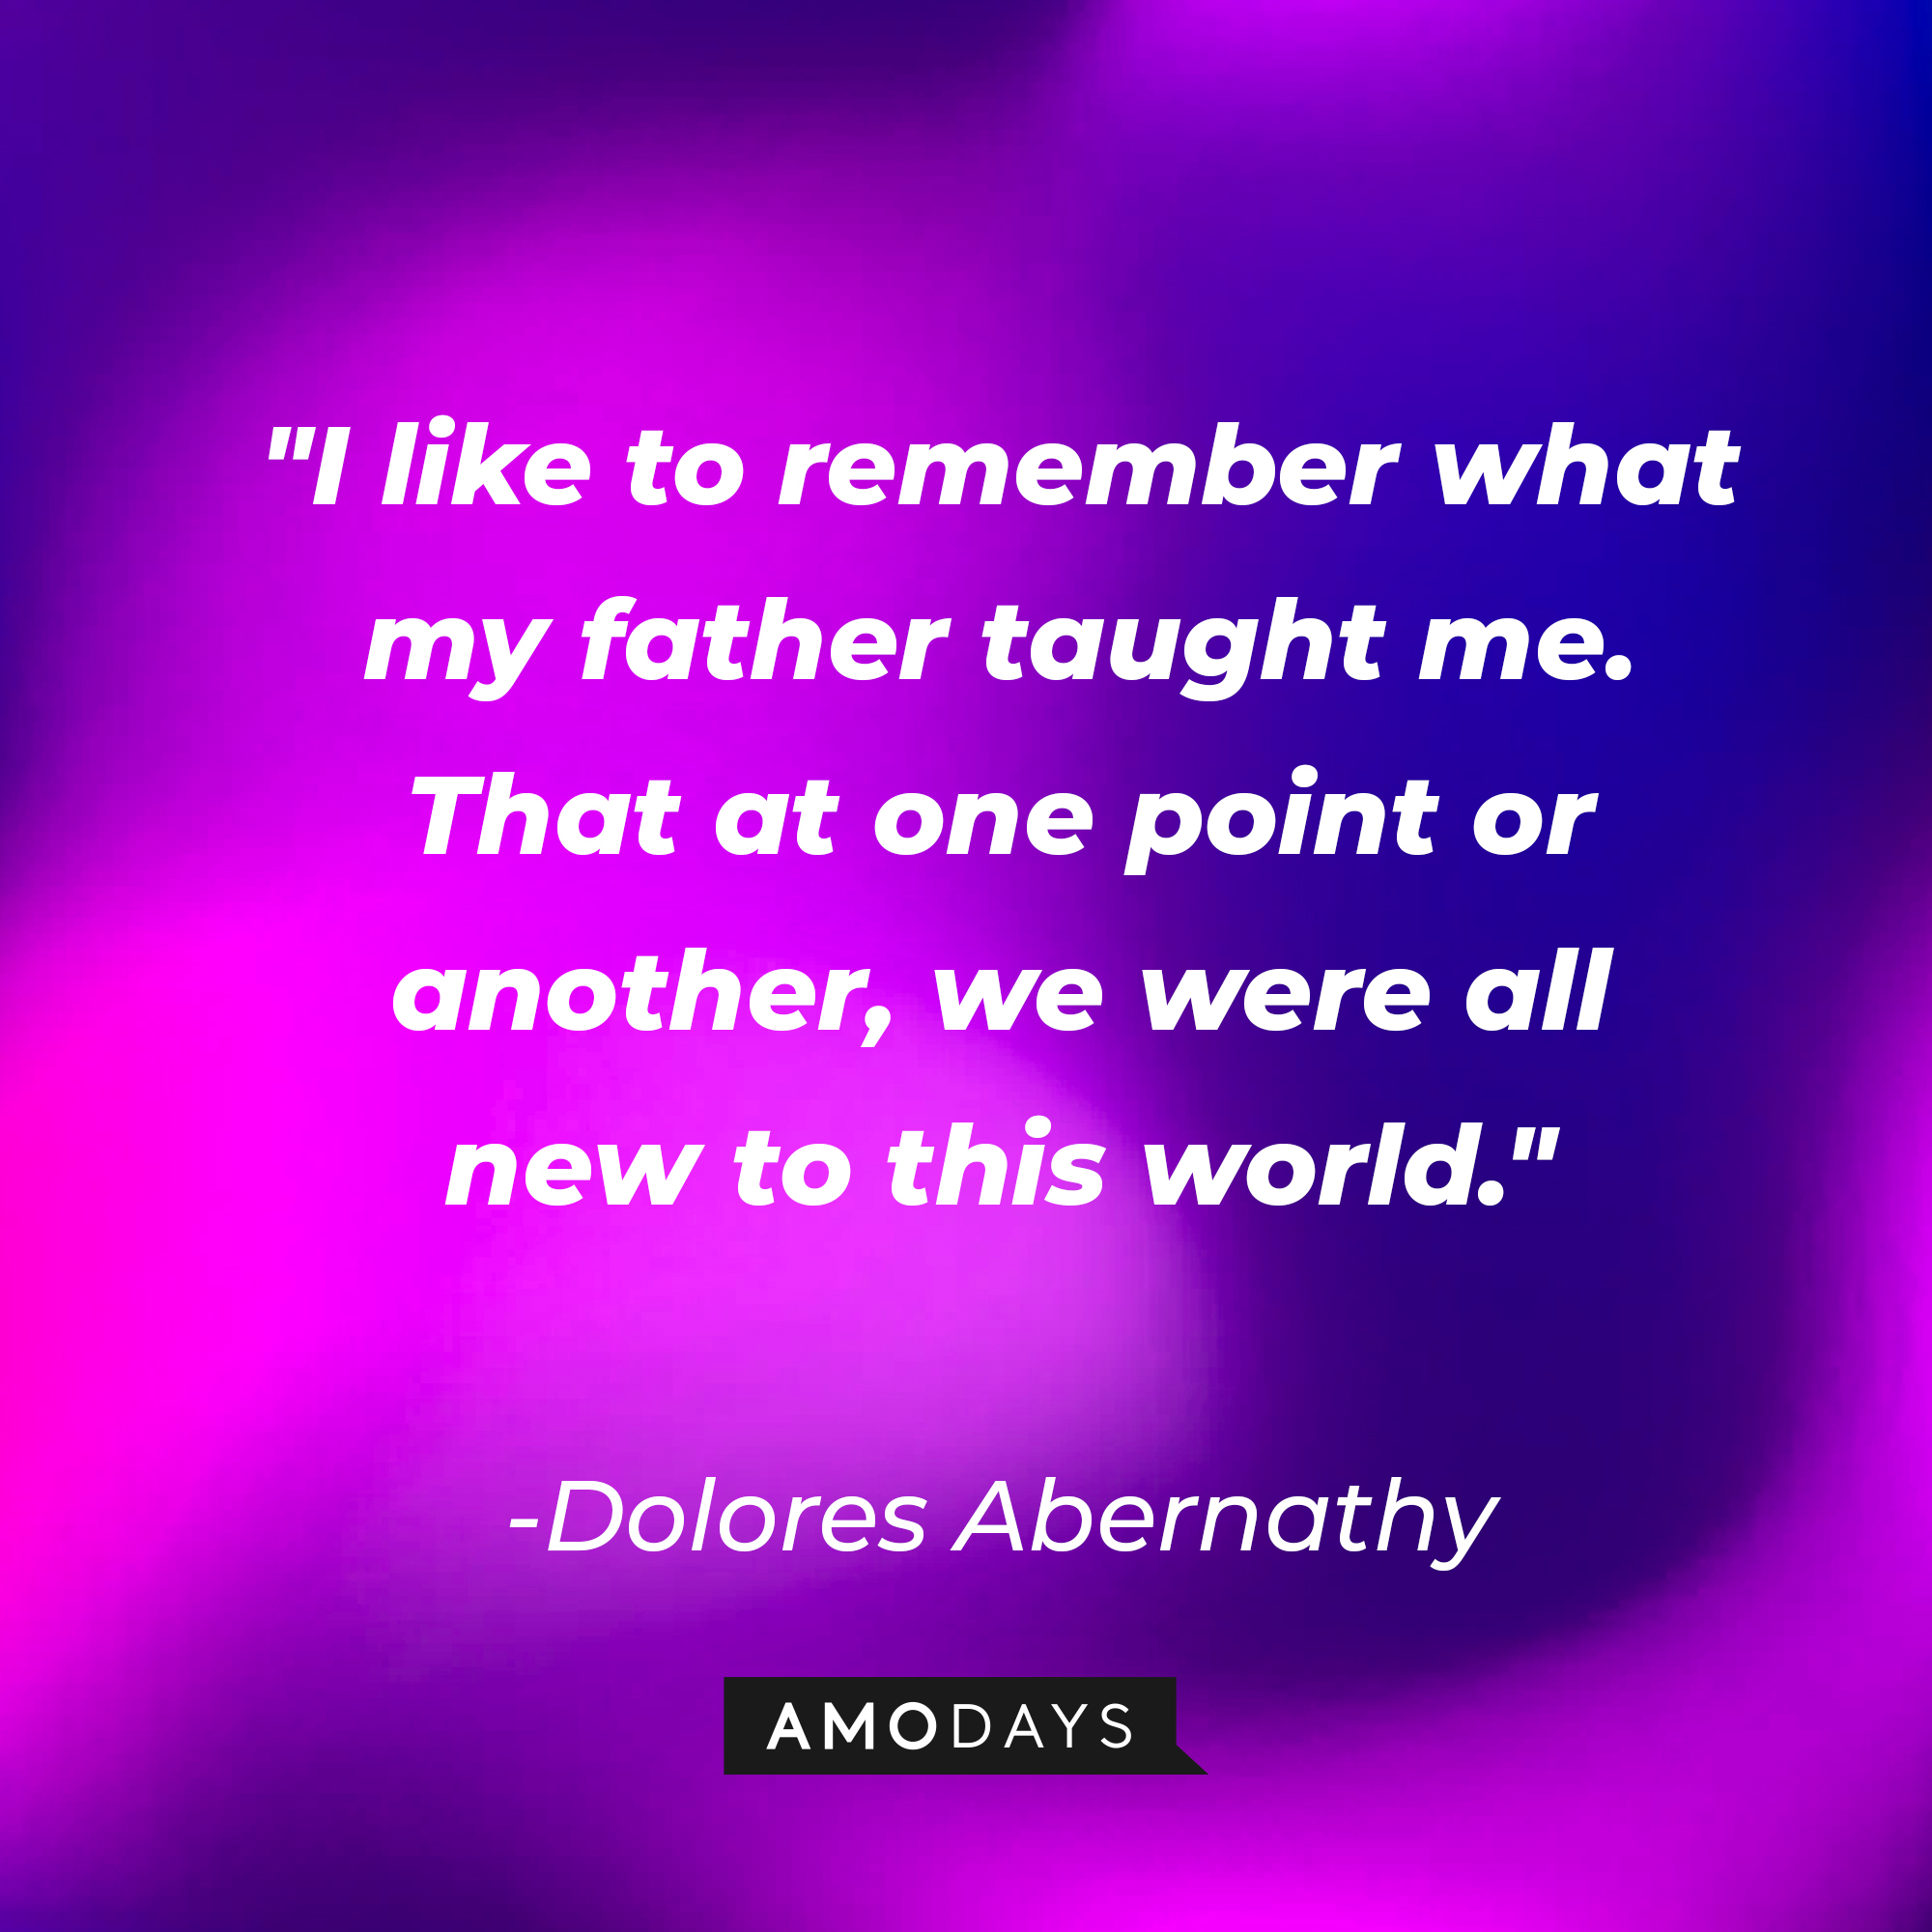 Dolores Abernathy's quote: "I like to remember what my father taught me. That at one point or another, we were all new to this world." | Source: AmoDays